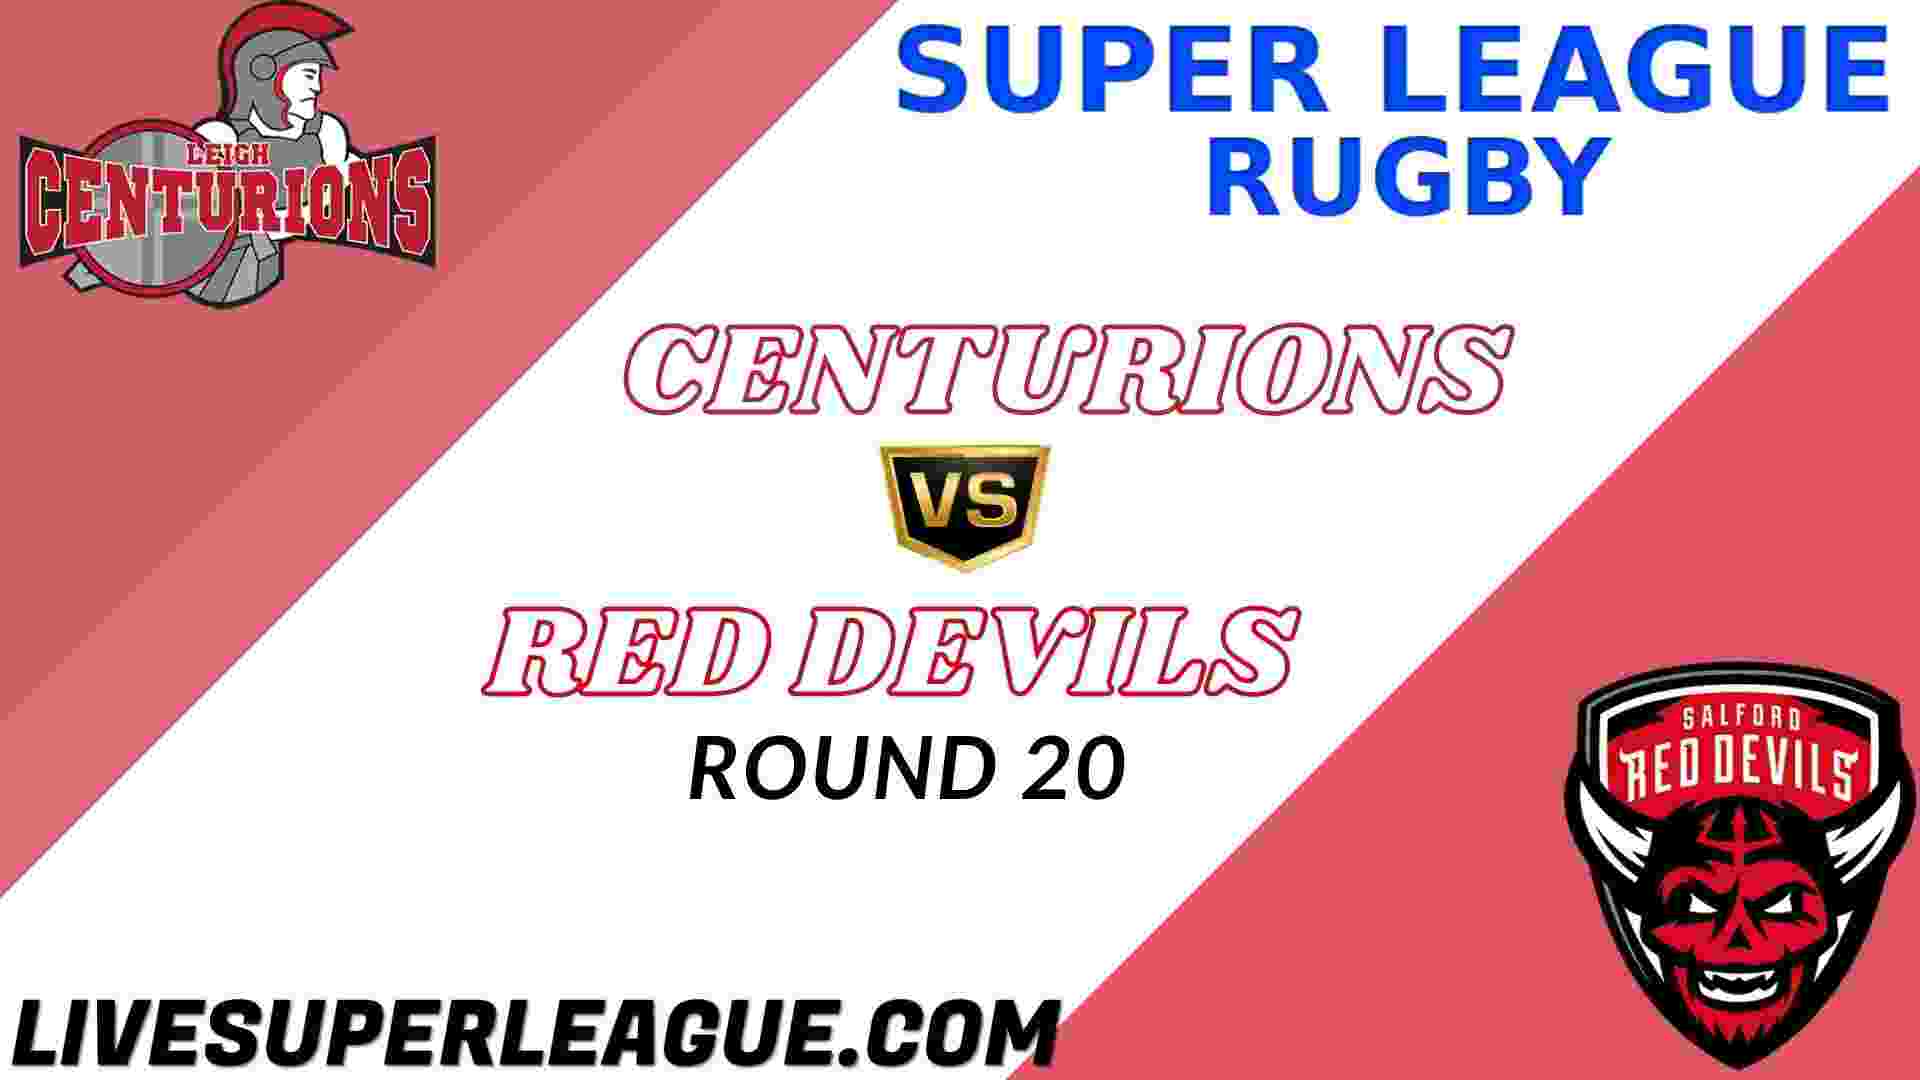 live-leigh-centurions-vs-salford-red-devils-coverage